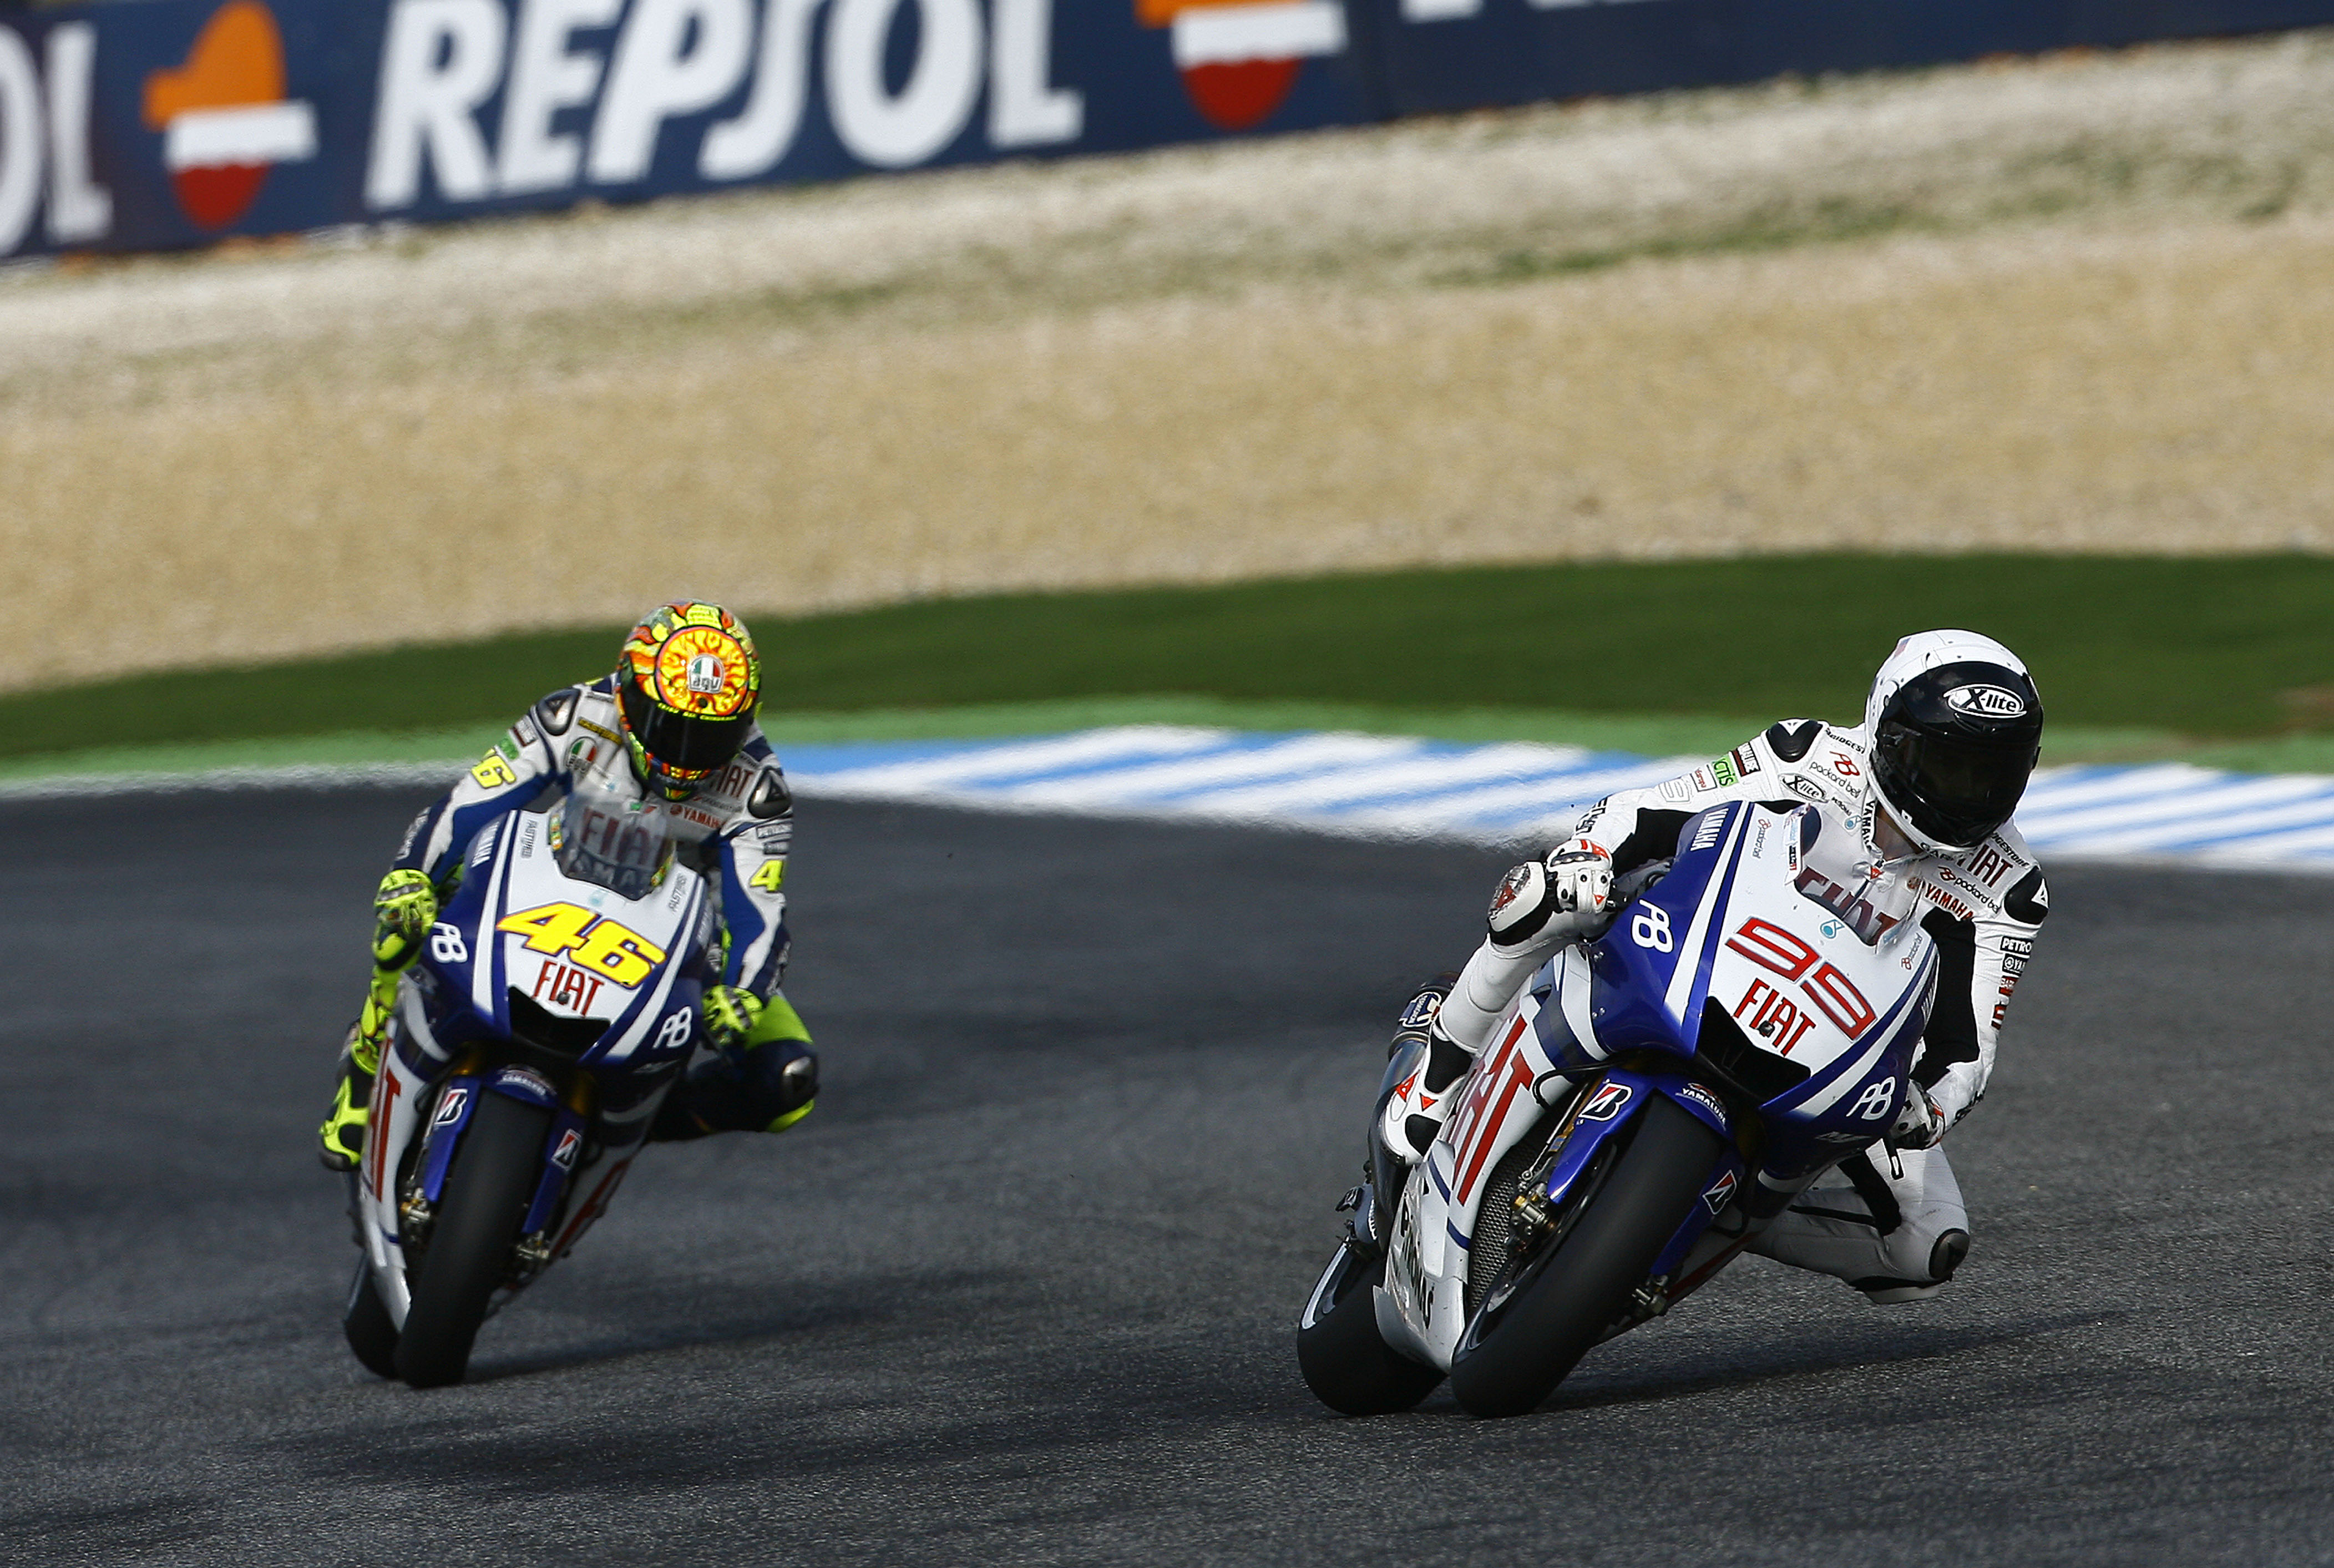 Rossi: I just want a win